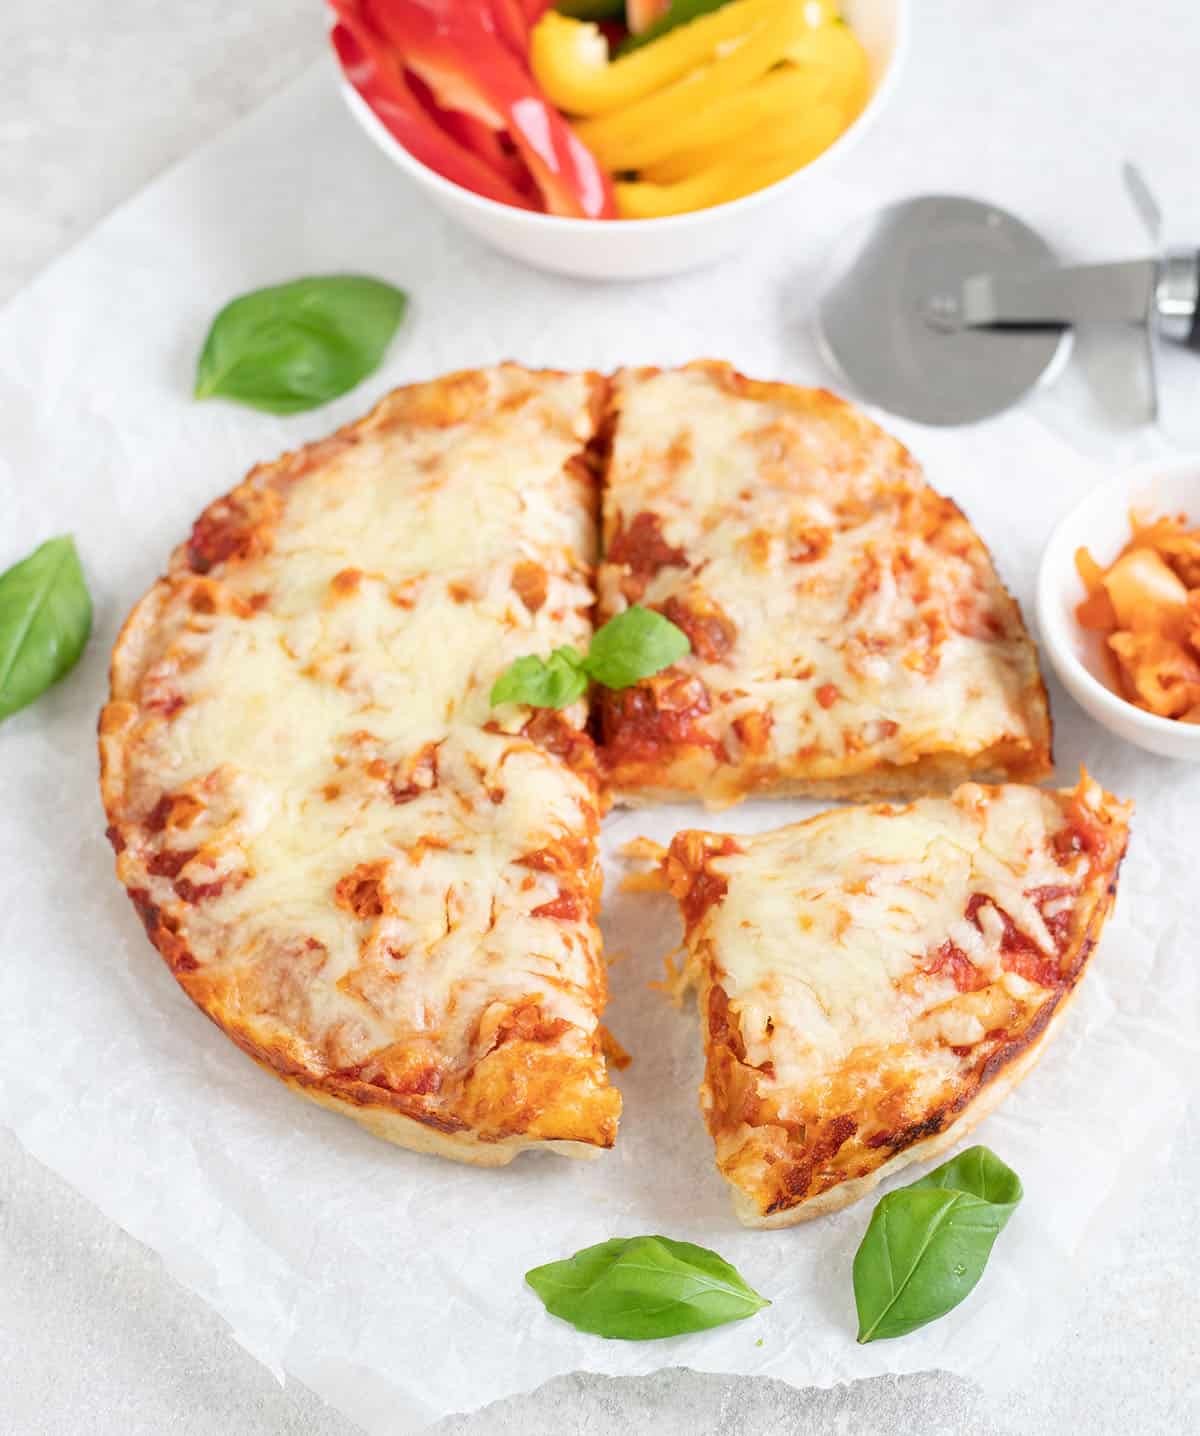 Kimchi Pizza topped with cheese and fresh basil leaves.